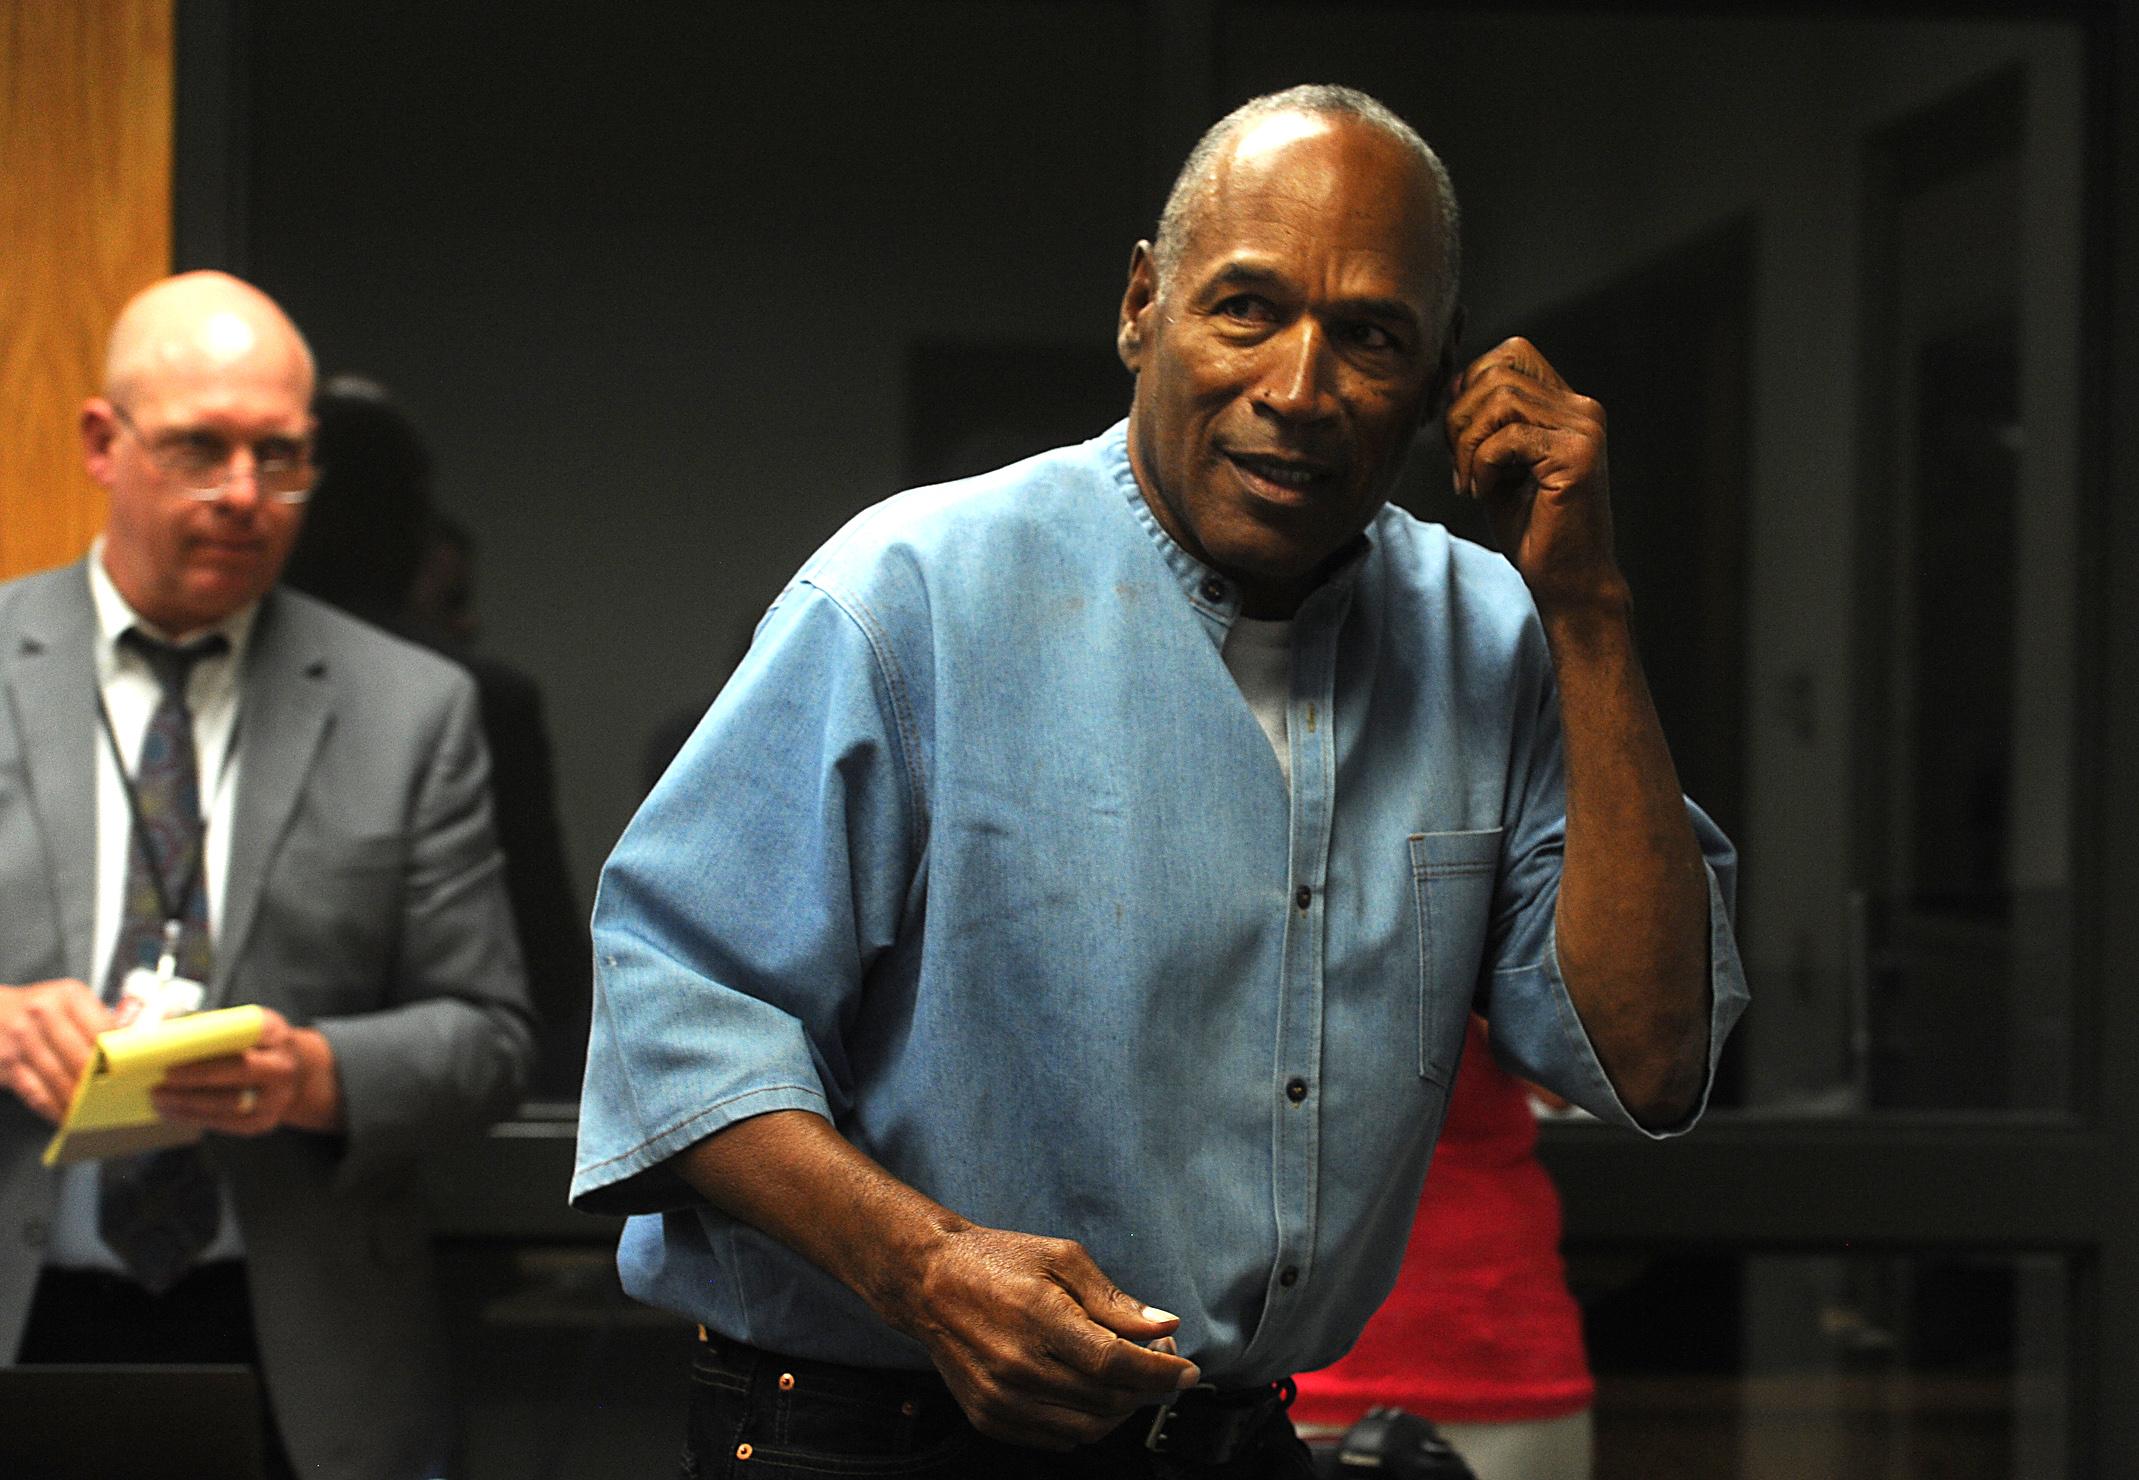 O.J. Simpson attends a parole hearing at Lovelock Correctional Center